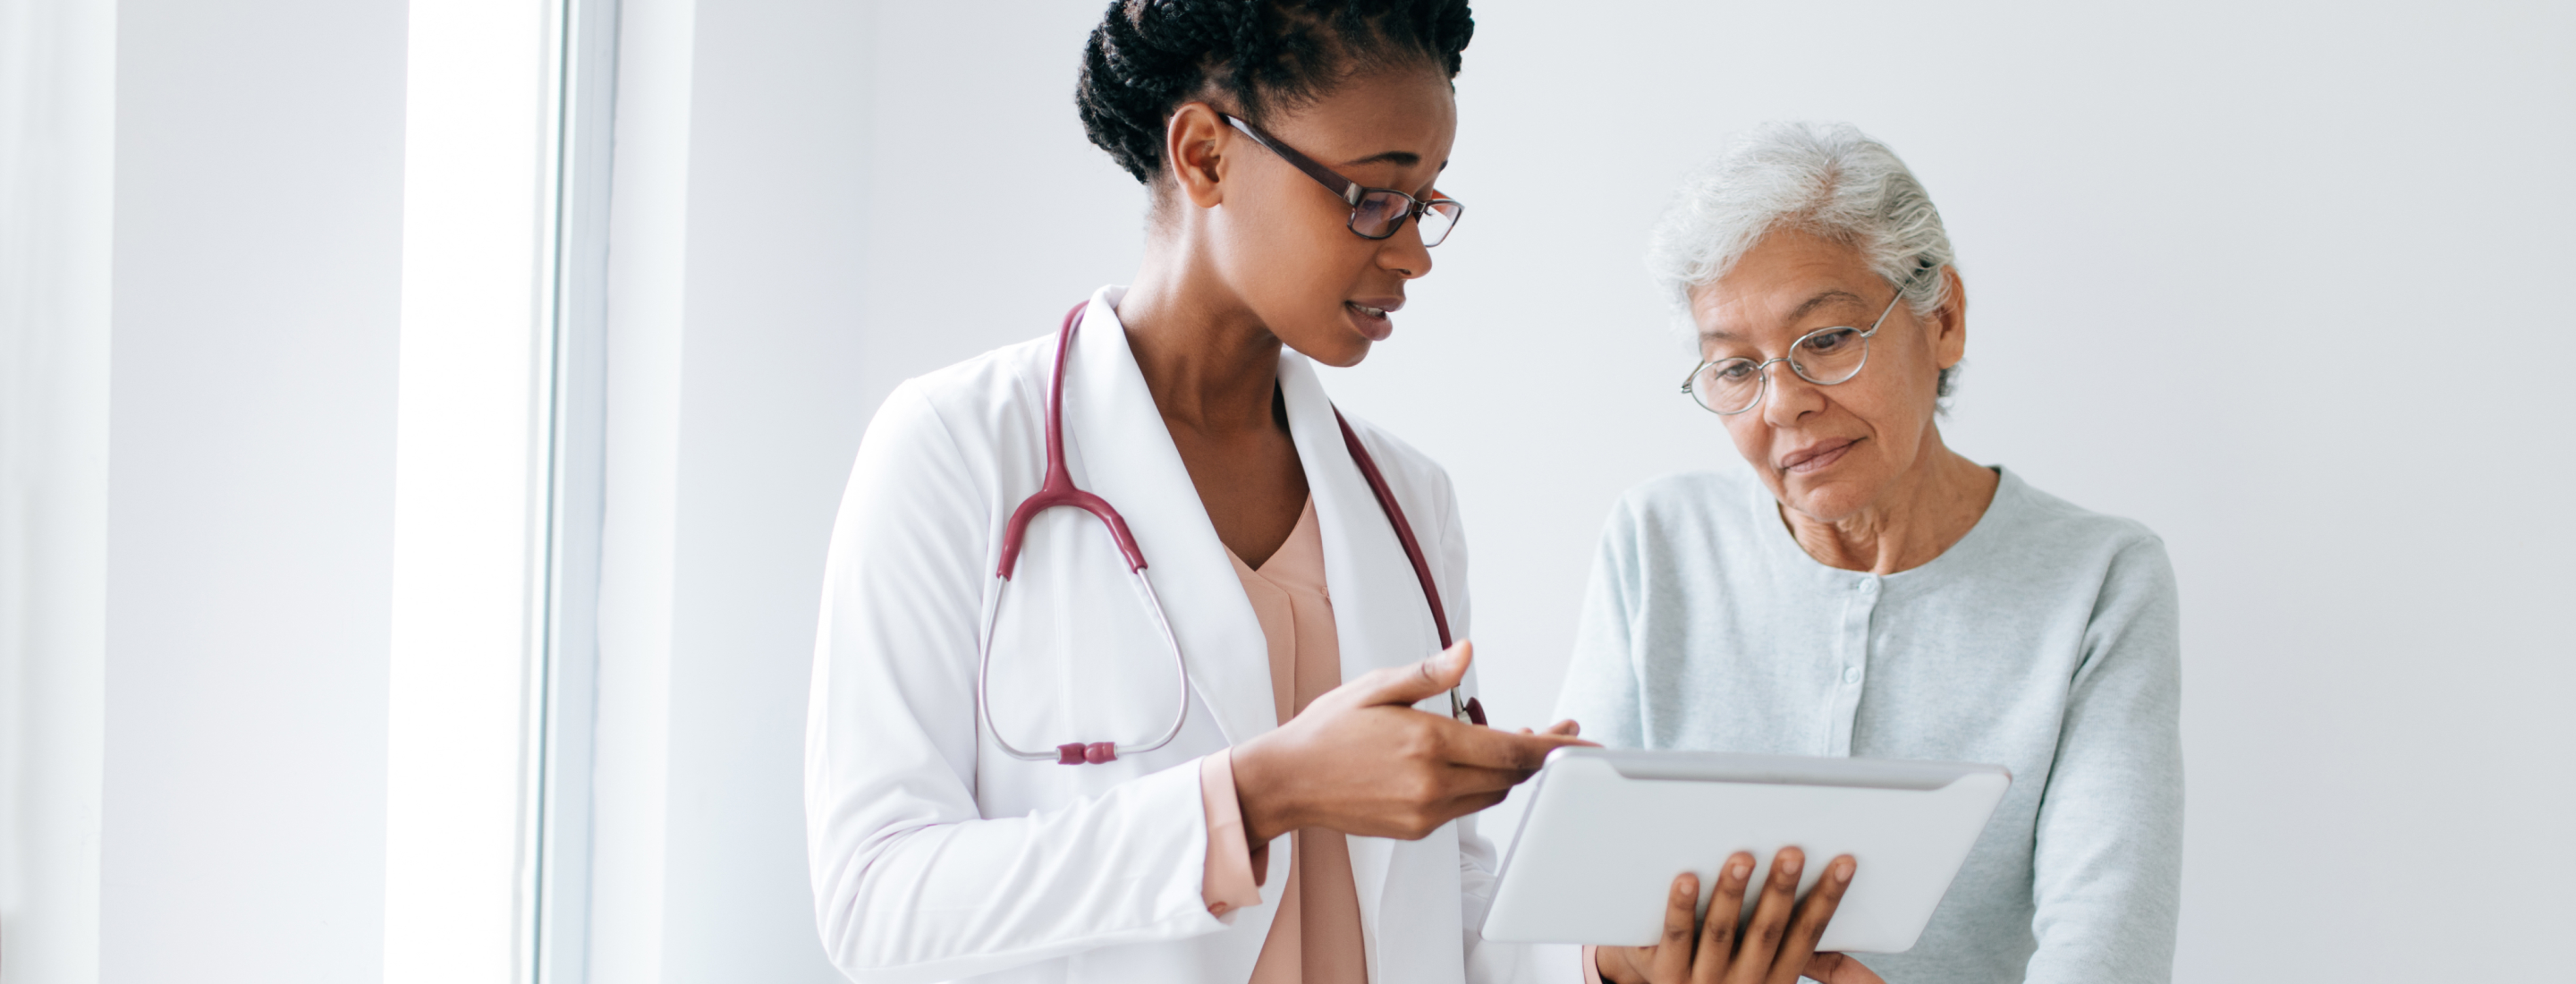 Primary Care Provider sharing results of a digital cognitive assessment featuring a clock drawing test with their patient